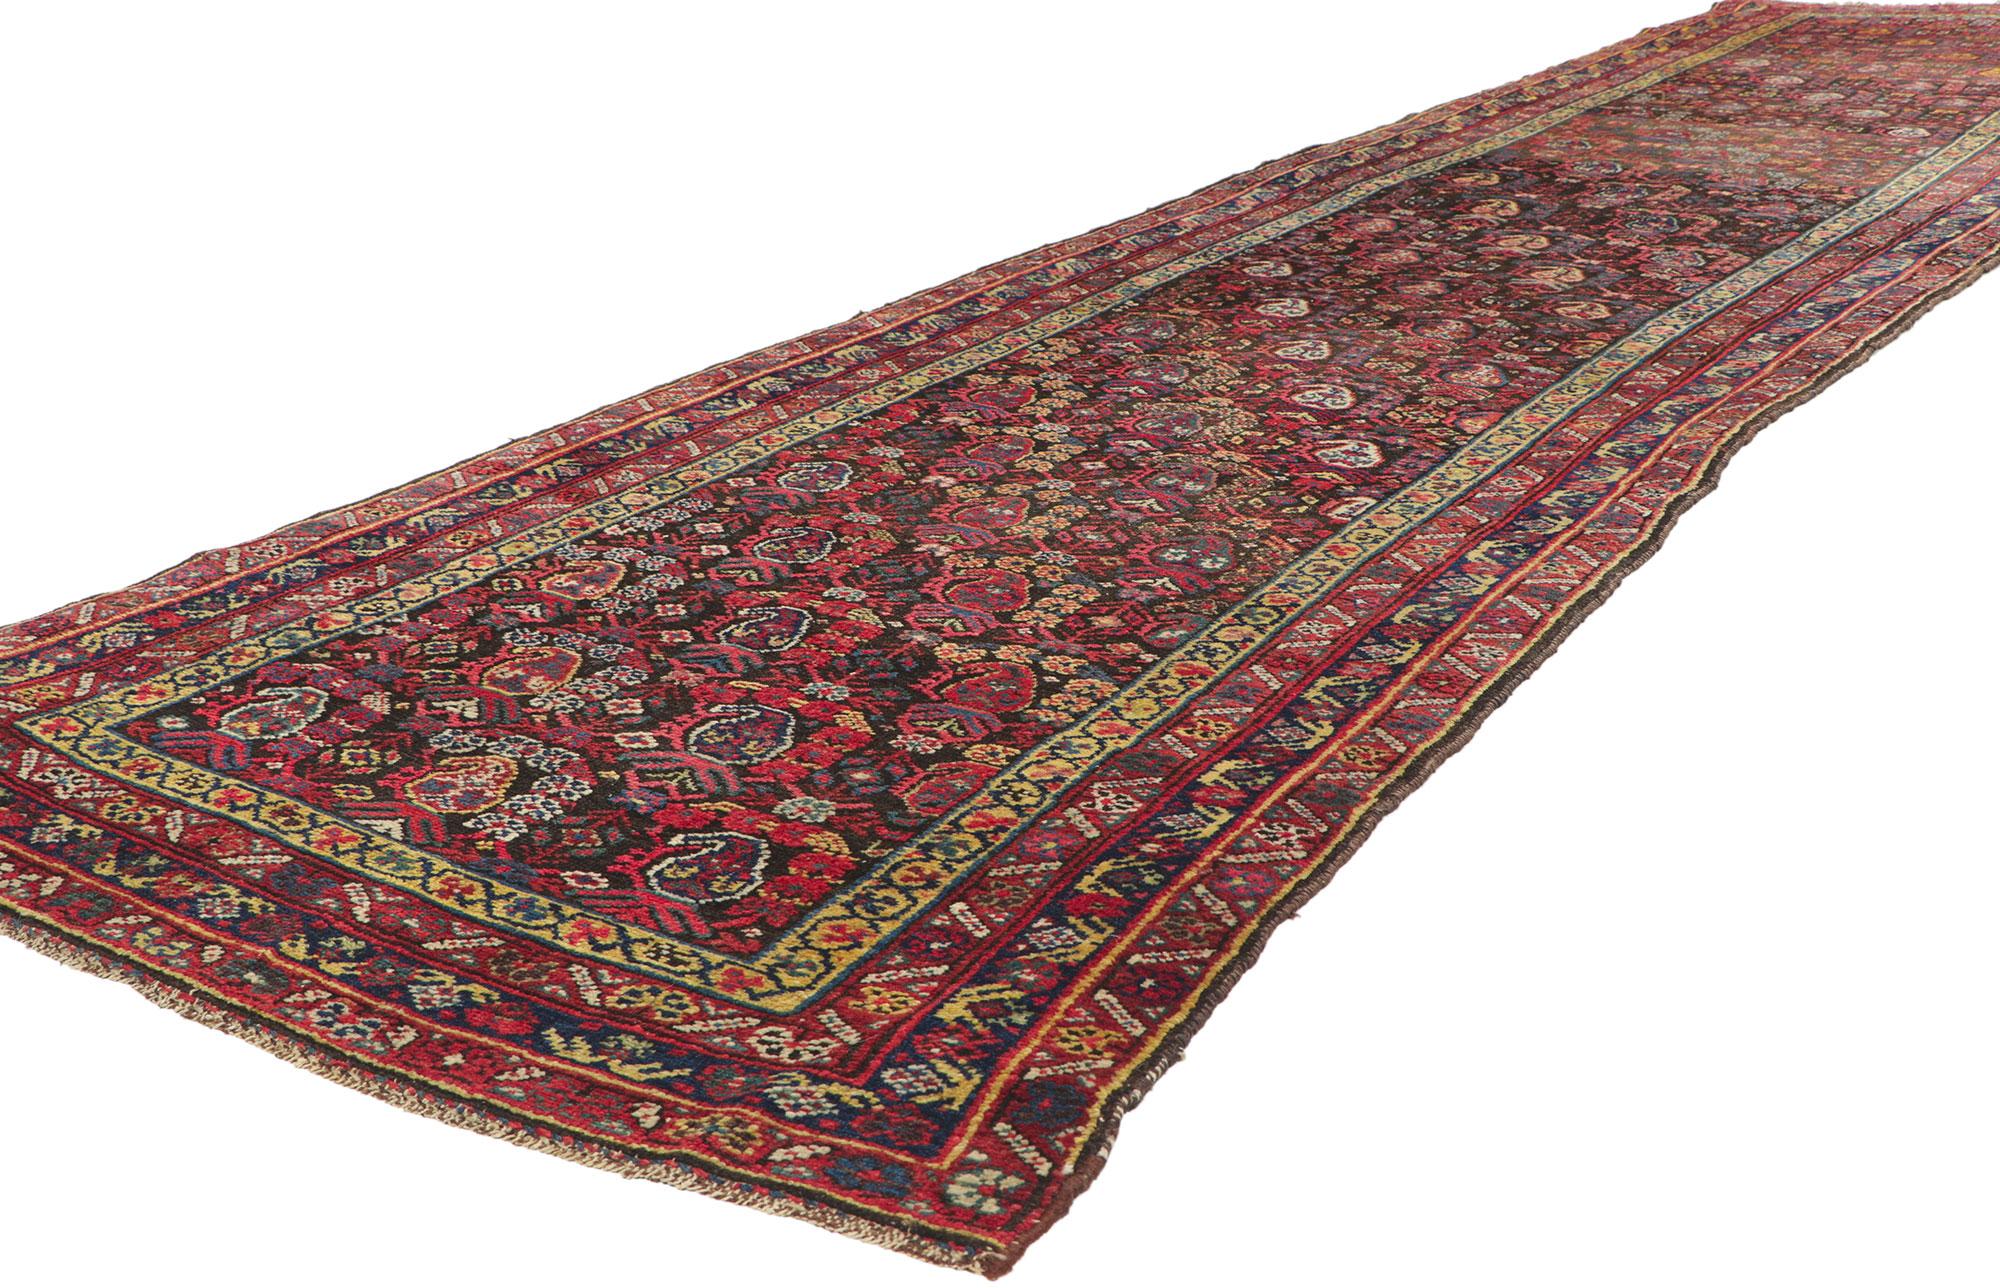 78521 Antique Persian Malayer runner, 03'04 x 14'08.
Allover Pattern. Boteh Motifs.
Abrash.
Hand knotted wool.
Made in Iran.
Measures: 03'04 x 14'08.
Date: Early 20th Century.